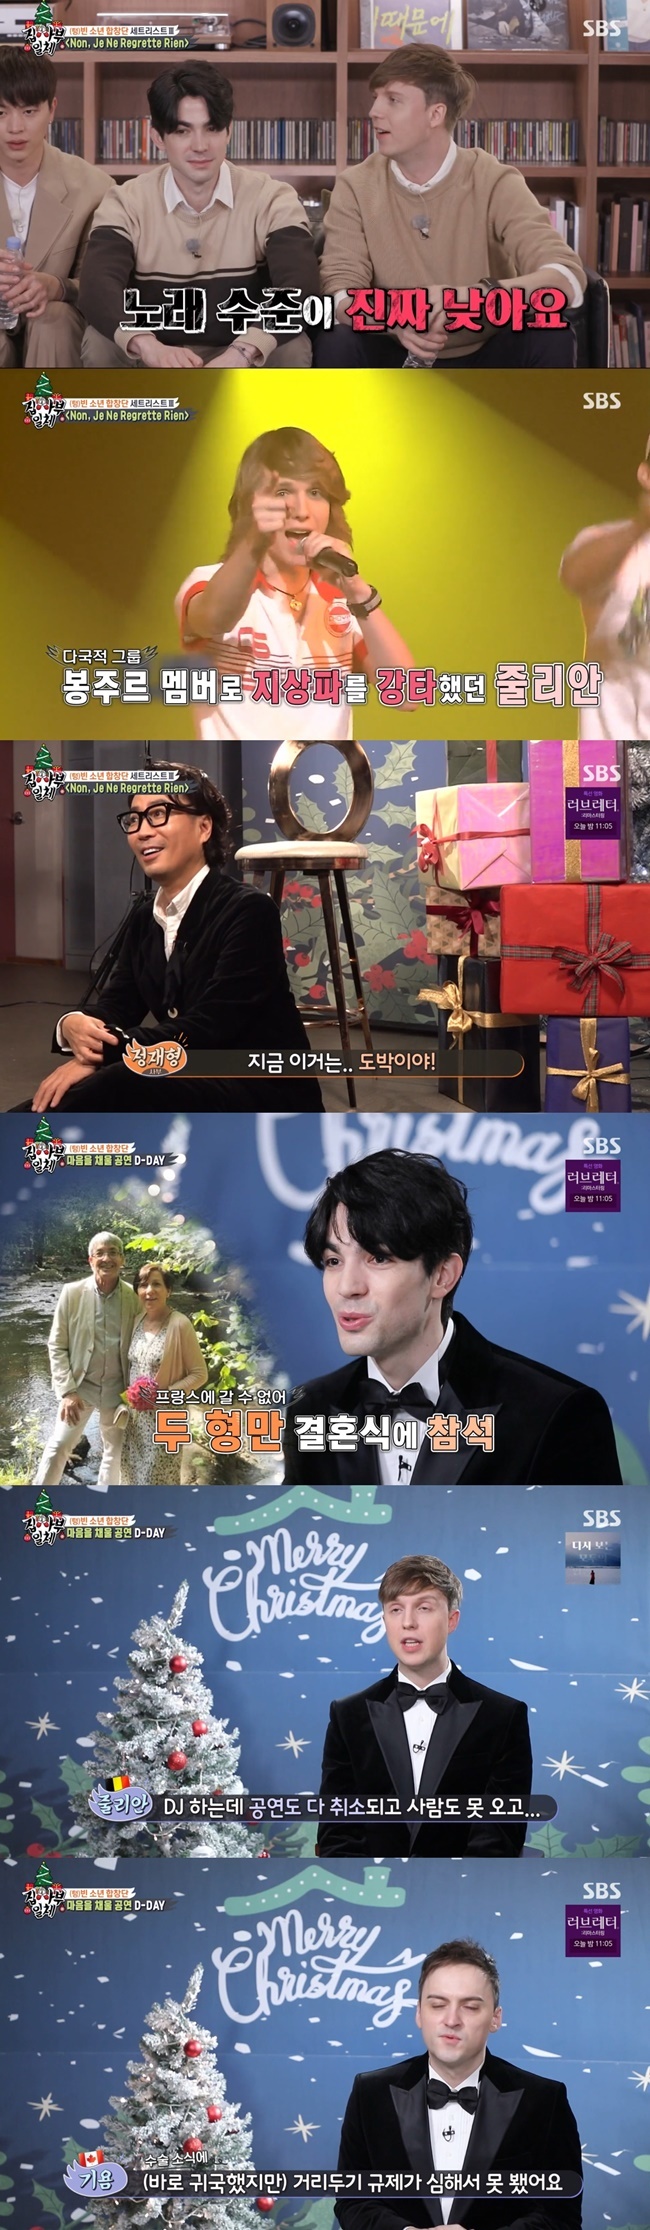 Robin, a former France broadcaster, expressed his longing for his family.On SBS All The Butlers broadcast on December 26, members were shown preparing for the performance of Master Jung Jae Hyung and (tung) empty boy choir.Earlier, Jung Jae Hyung proposed a (tung) empty boy choir performance to fill the hearts of lonely people.The members selected the song Holo Arirang with Jung Jae Hyung and the OST Non, Je Ne Regrette Rien of the movie Lavian Rose.Julian and Robin appeared as French teachers. Julian added, This Friend is from a singing program, and I made my debut in popular song.But Julian and Robin showed off a shocking double window, and Jung Jae Hyung was frustrated; Kim Dong-Hyun quivered, saying, Im better?Robin from France said, We are toneless, and Julian from Belgium said, France people can not sing originally. Other foreign friends are coming.We may be senior, laughed Jung Jae Hyung, who said in an interview, now this is a gamble, you have to practice without rest.I dont have time for interviews, he apologized to the production team.As well as members of All The Butlers, they decided to prepare for the performance with several national foreign broadcasters, including Alberto Fujimori (Italy), Daniel (German) Julian (Belgium), Robin (France), Lucky (India), Guillaume Musso (Canada), an 18-member orchestra and a childrens choir, who had to spend the year alone.Robin said: My parents didnt get married originally, they lived together for 45 years and now wanted to marry, so I tried to open my parents Wedding ceremony with my brothers in the summer.But only two brothers went, and I could not go and I was sorry. Guillaume Musso said: My father is sick, at first I didnt see it because of the heavy street-keeping regulations.It was hard then, he said, and Julian said, I was doing DJ, and the performance was canceled and people could not come.I want to see my mother the most, said Luckily, and Alberto Fujimori, I want to see my family the most, now the hardest and most empty.